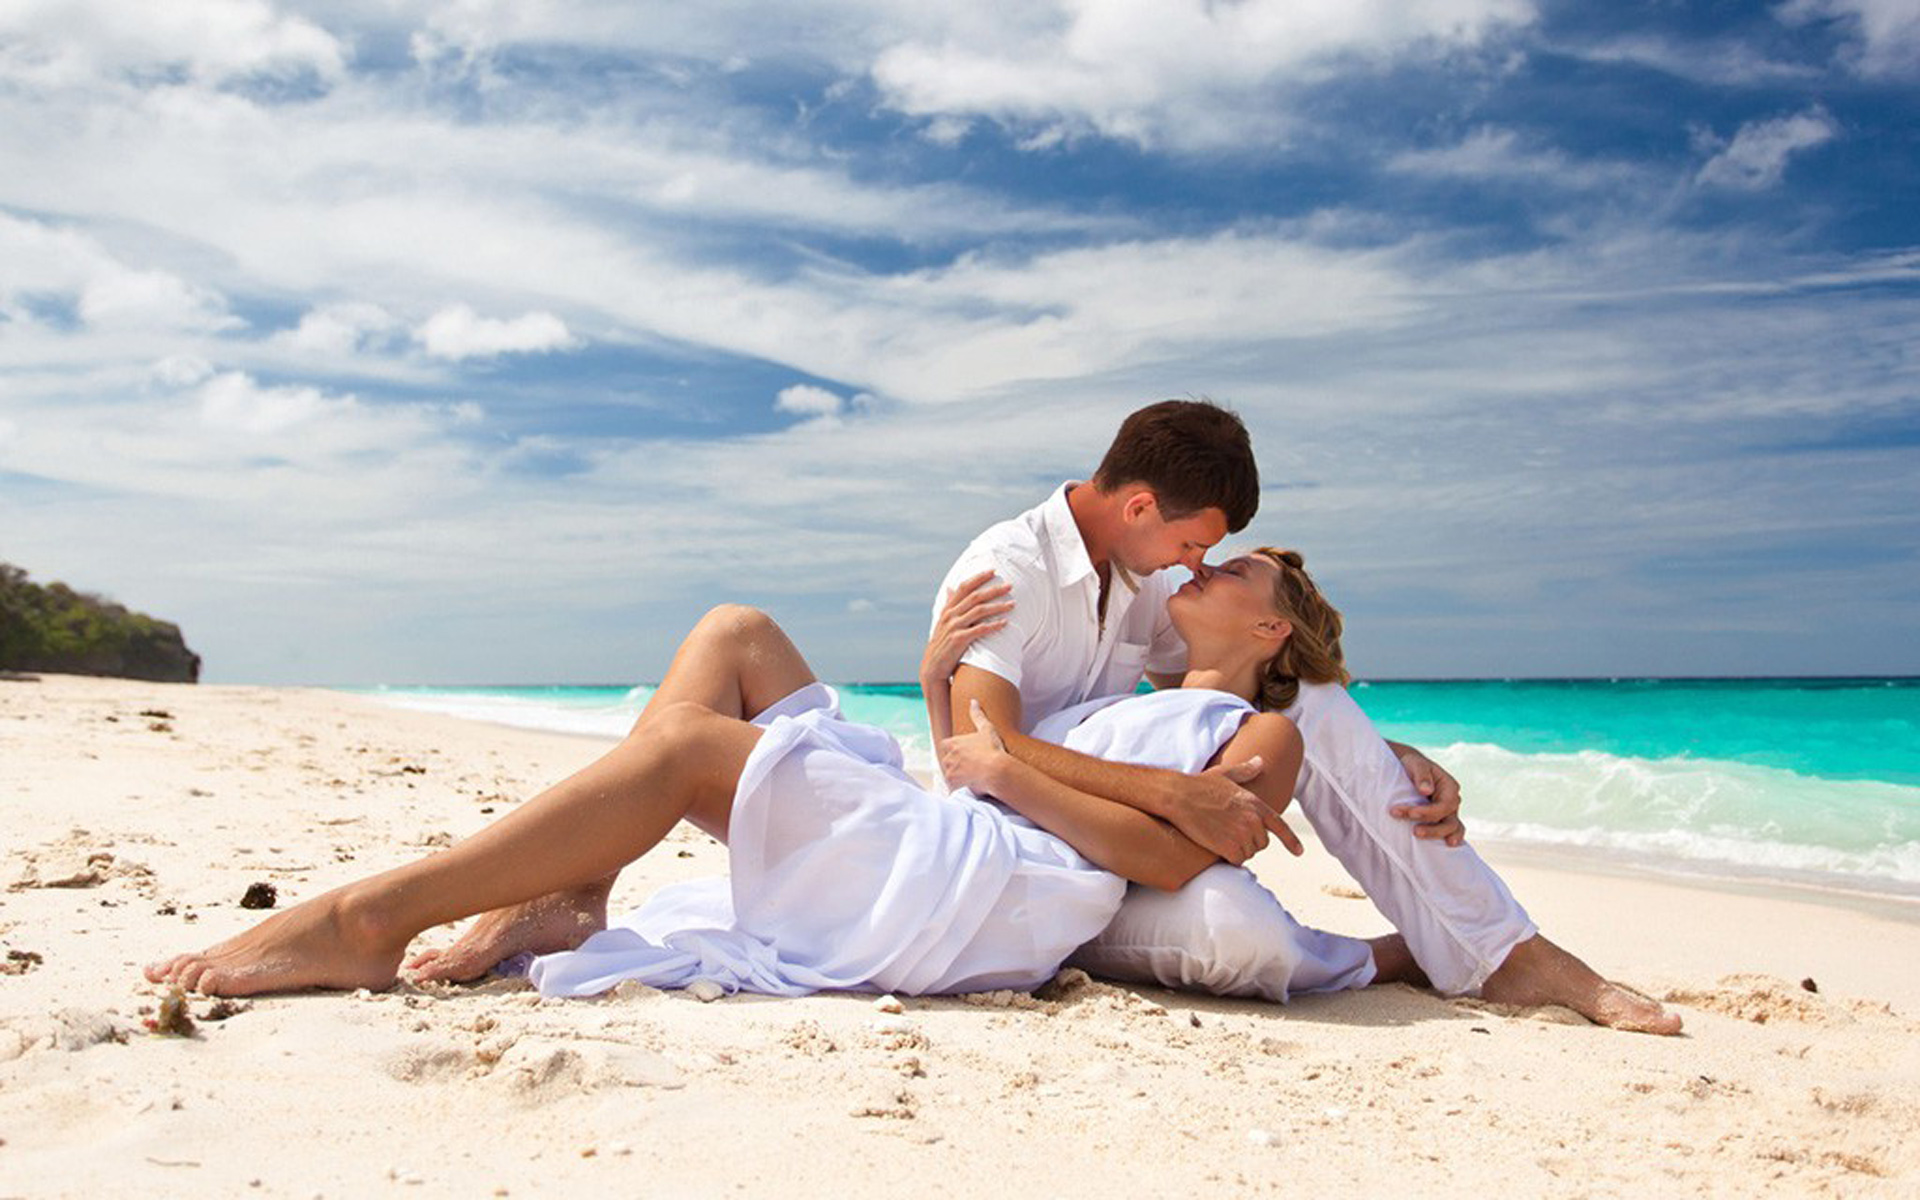 Love Romance Kiss Summer Sea Beach Romantic Couple Hd Wallpapers For Mobile Phones Tablet And Pc